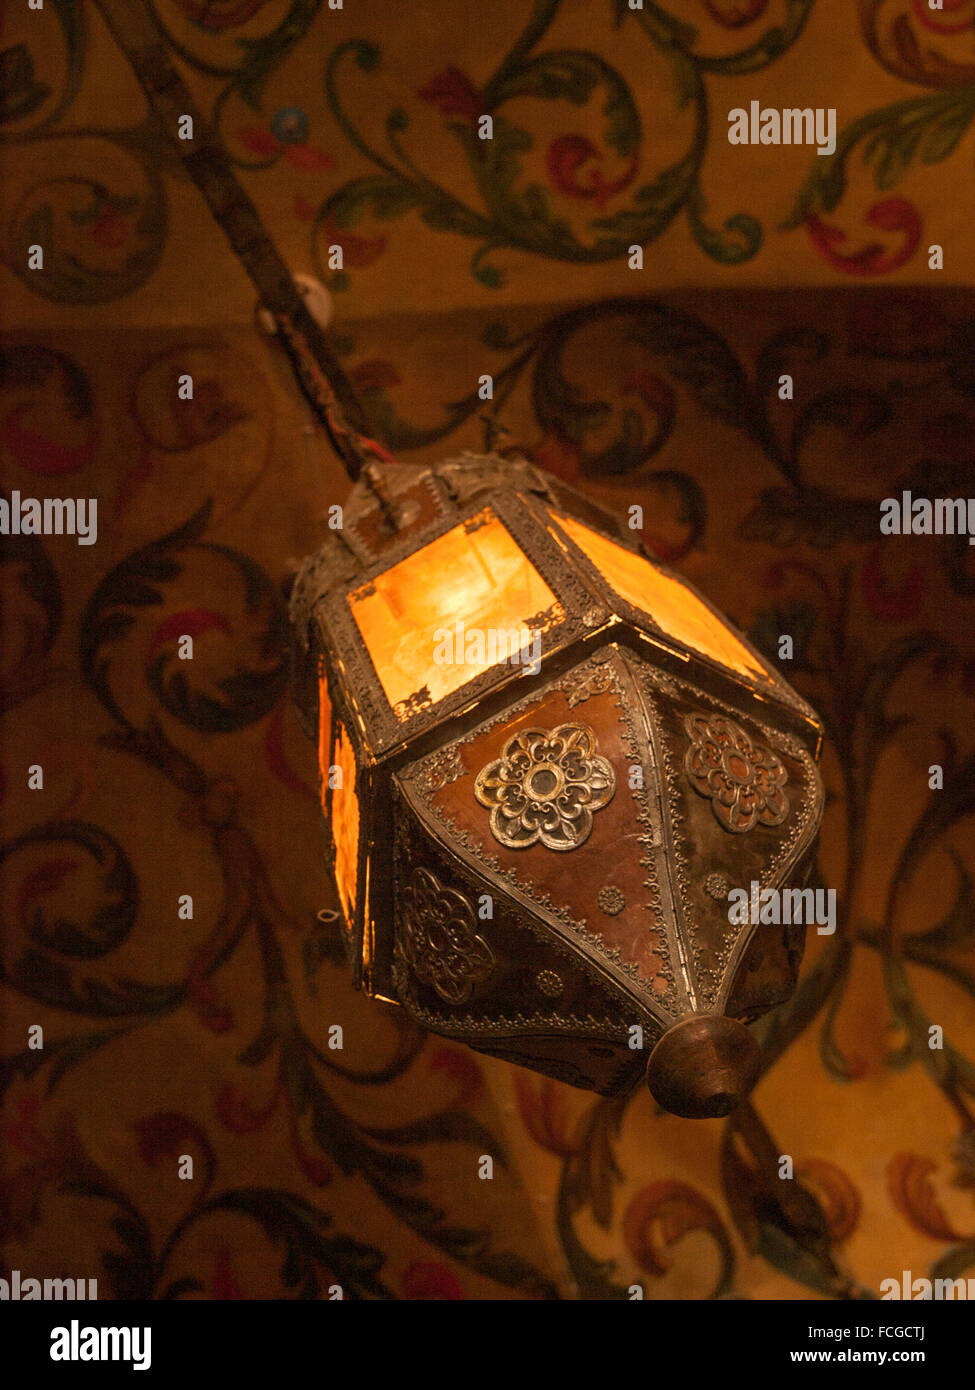 Hanging ornate light fixture and painted walls inside St Basils Cathedral in Moscow Russia. Stock Photo